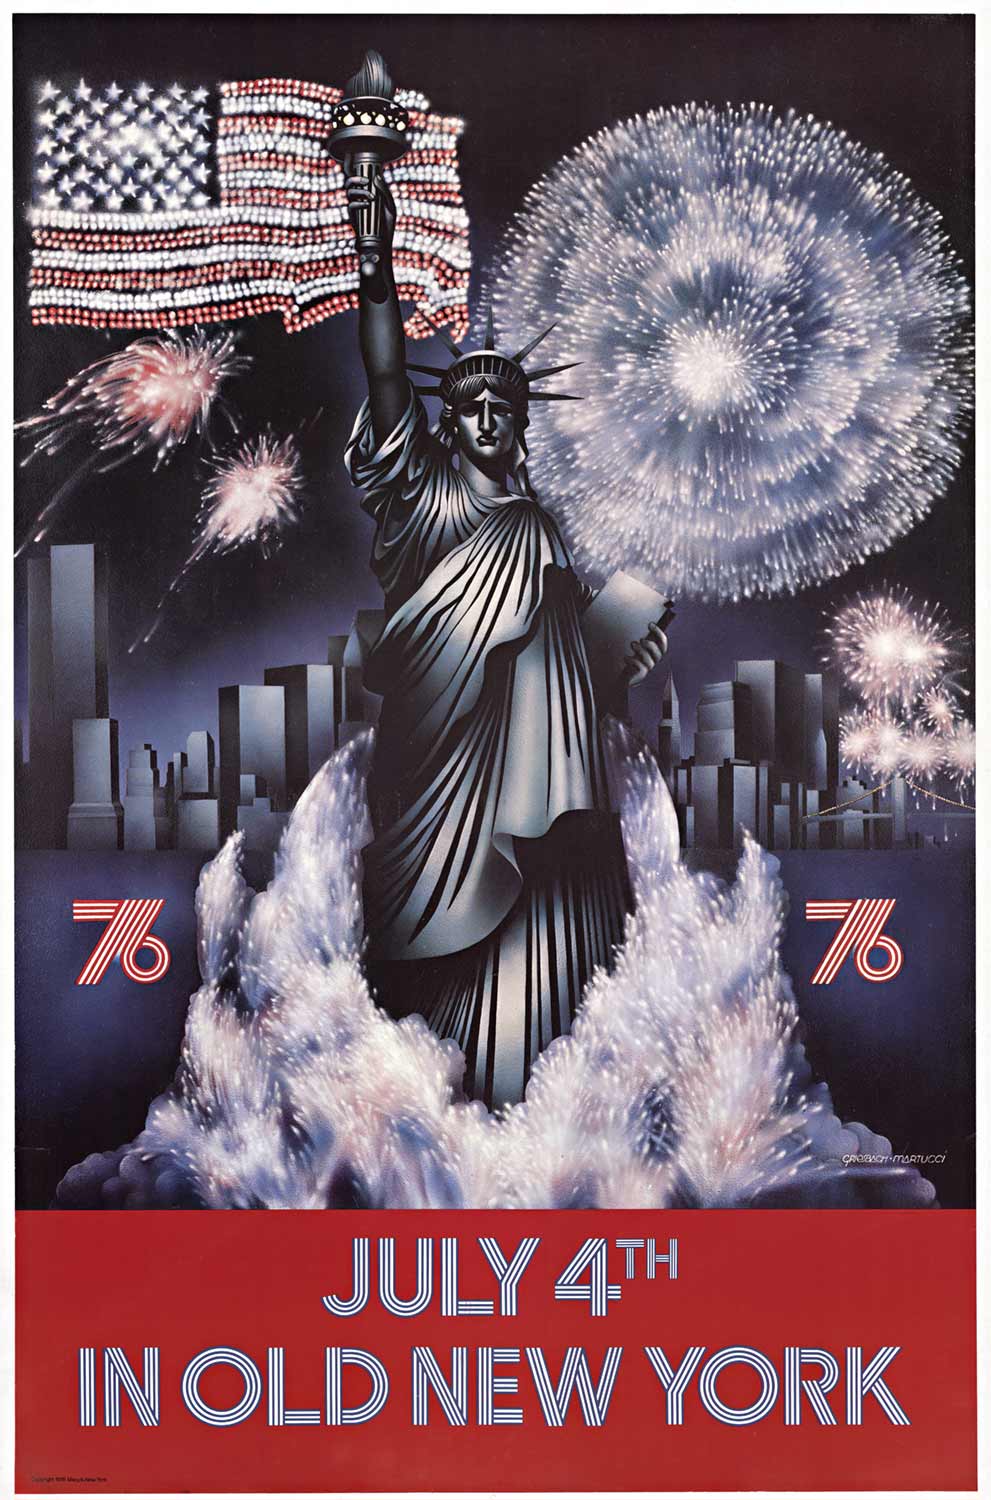 Celebrating the bicentennial, this poster announces the 4th of July celebration in New York City.